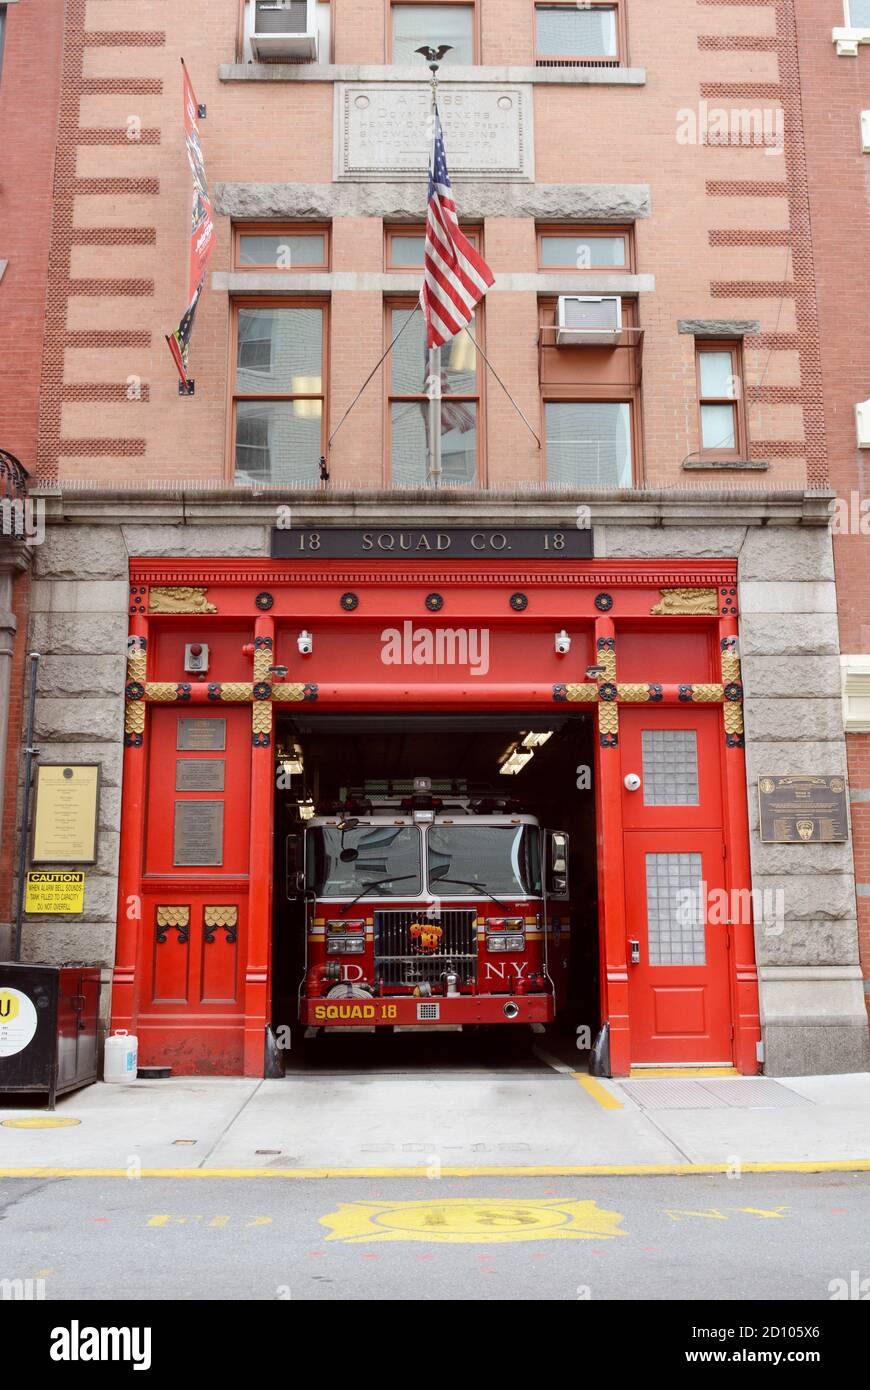 NEW YORK, USA - MAY 10, 2019: Exterior of FDNY Squad 18 building at 132 West 10th Street on May 10, 2019. The New York Fire Department fire truck stan Stock Photo